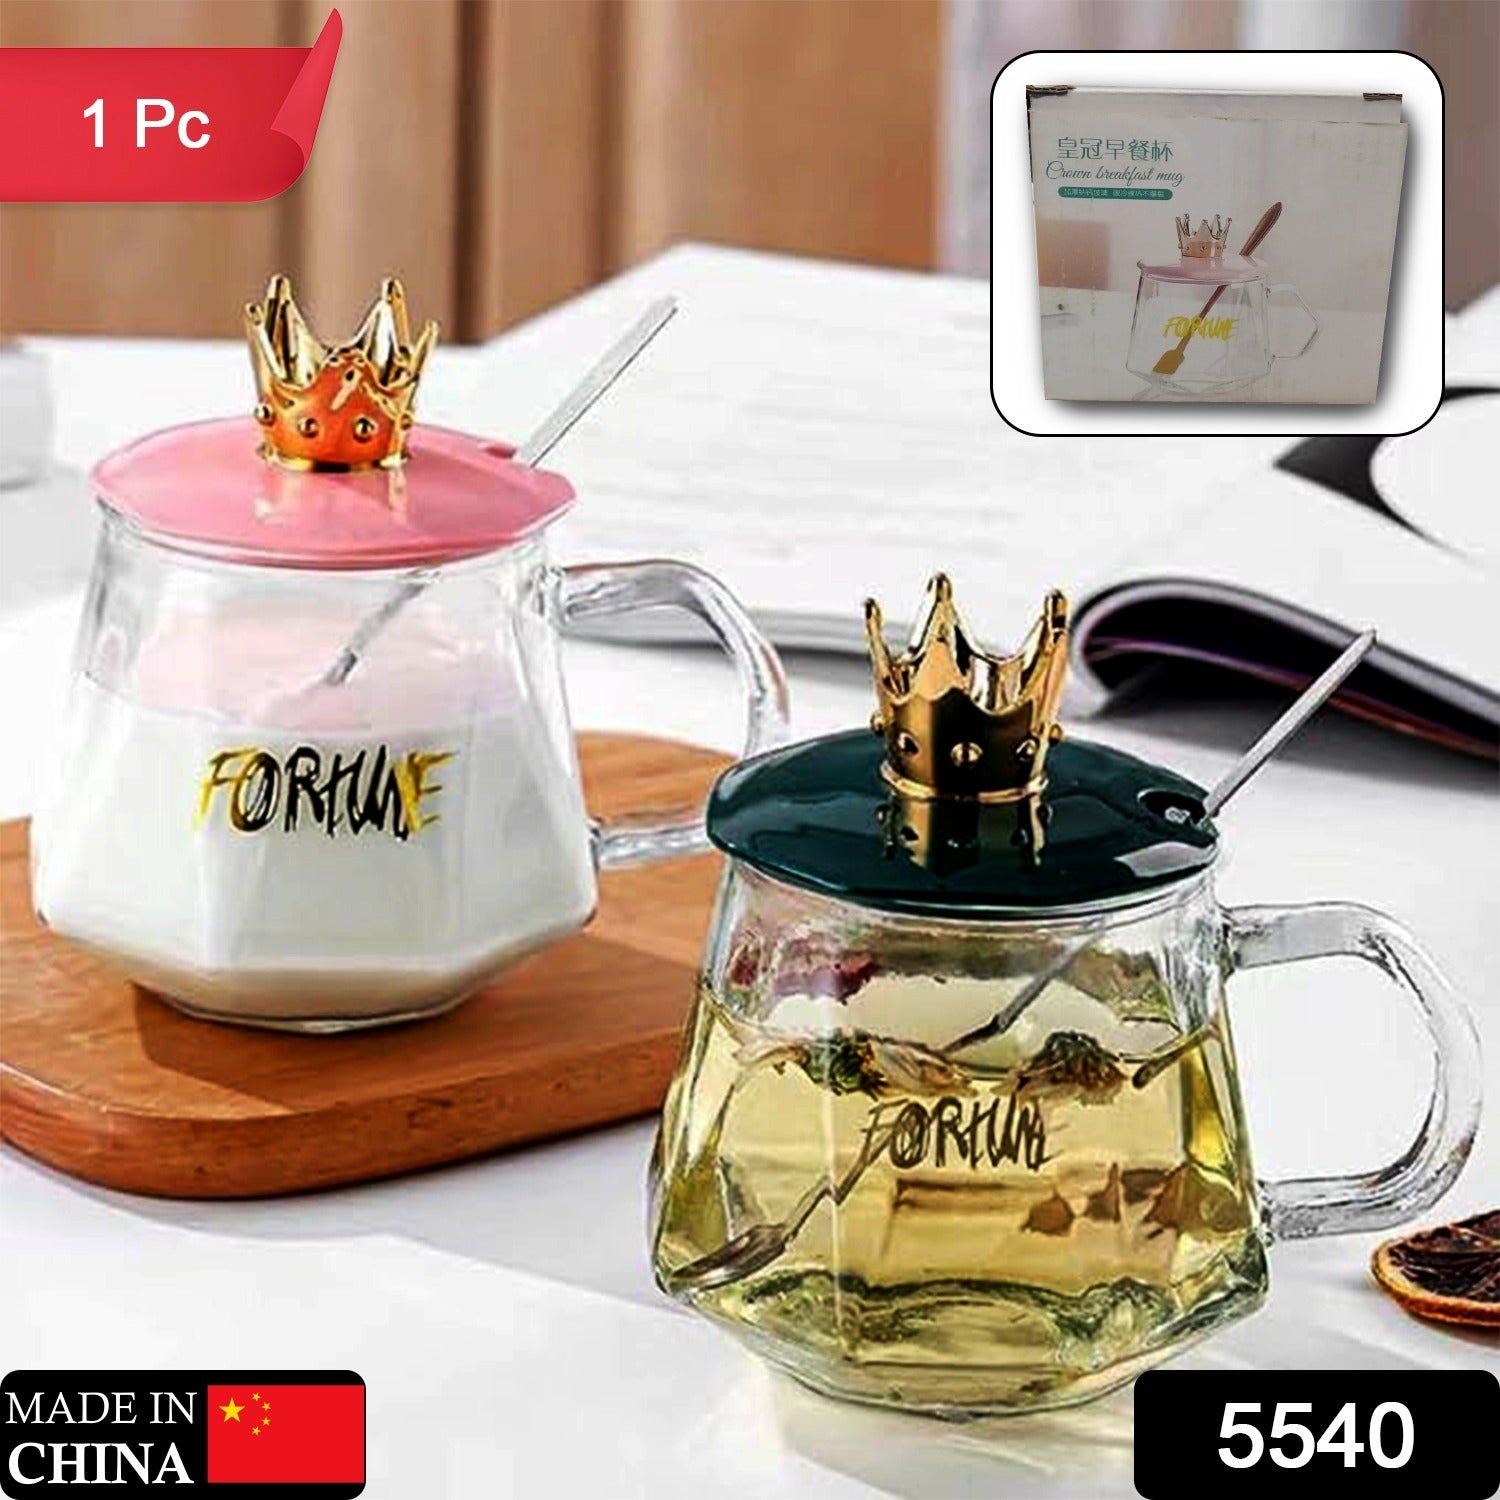 5540 Tea-Coffee Mug Golden Crown Shape and Stainless Spoon, Glass Cup With Hand, Milk, Chocolate and Beverage, Tea and Water, Clear Drinking Cups (1 Pc)